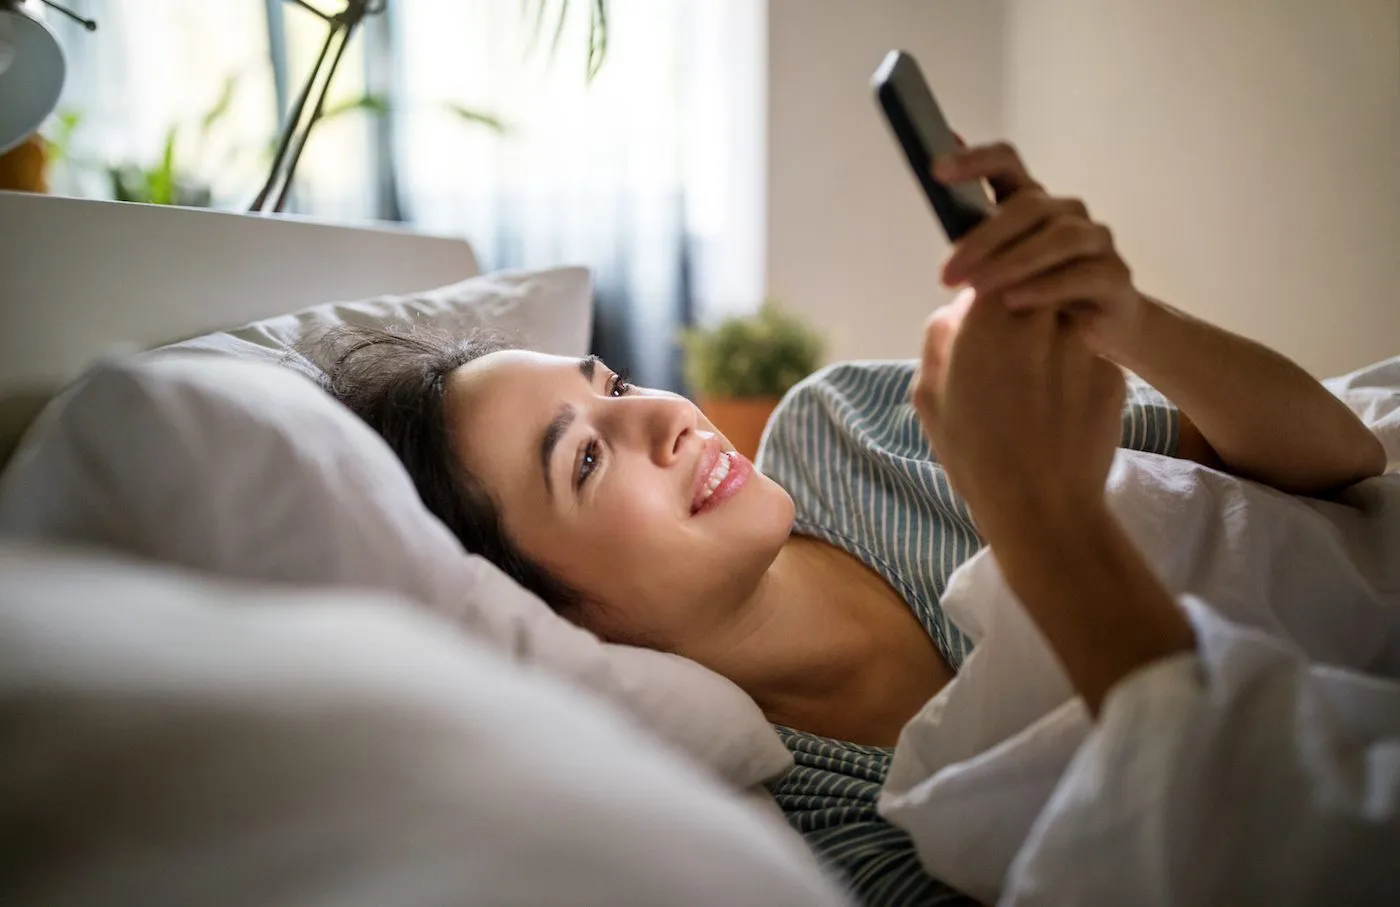 Am I Addicted To My Phone? Quiz Using phone when waking up